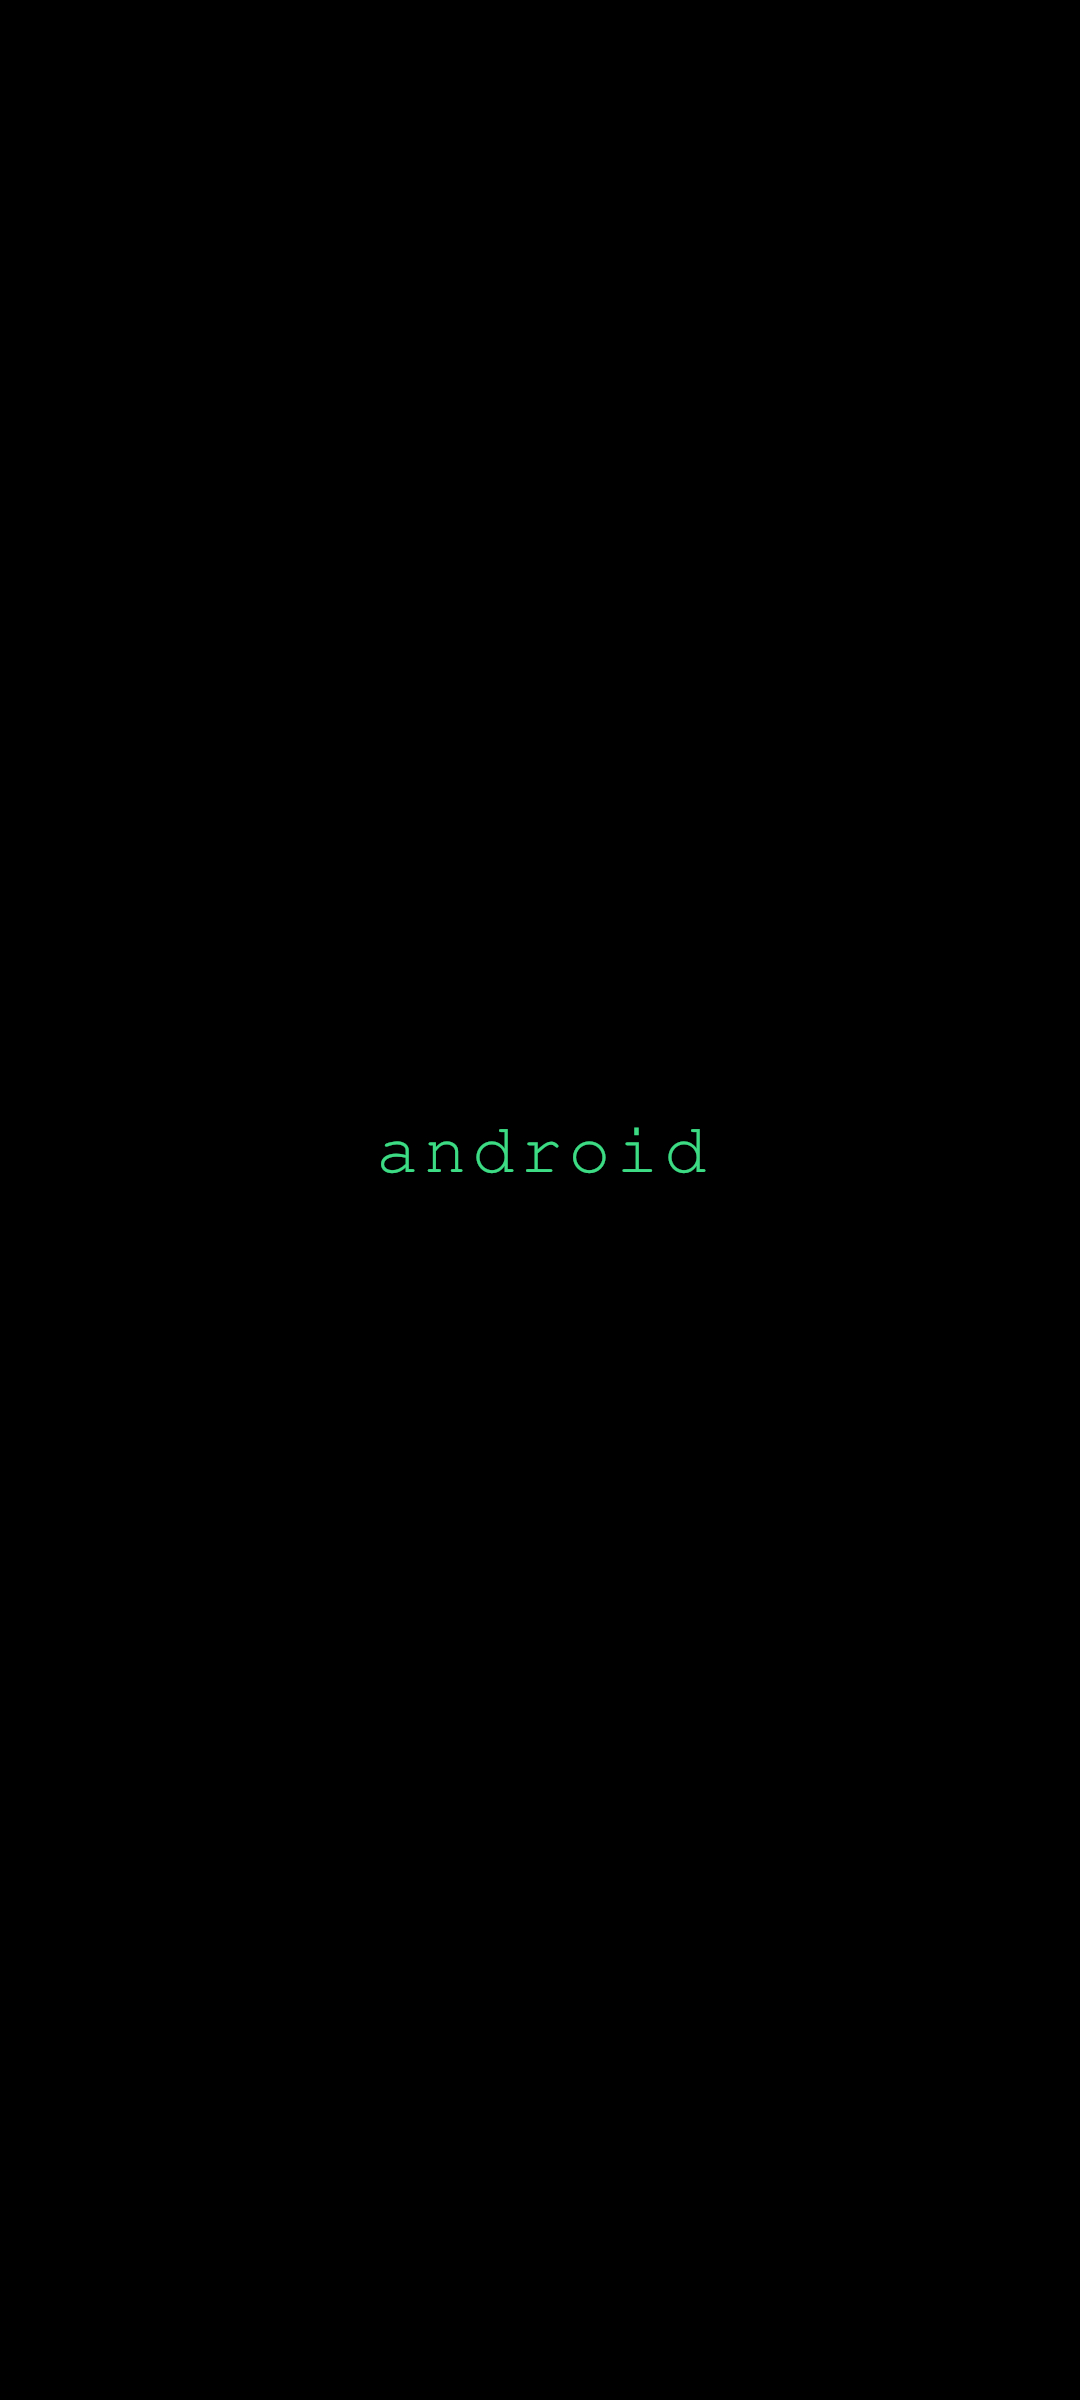 General 1080x2400 Android (operating system) simple background dark portrait display text minimalism